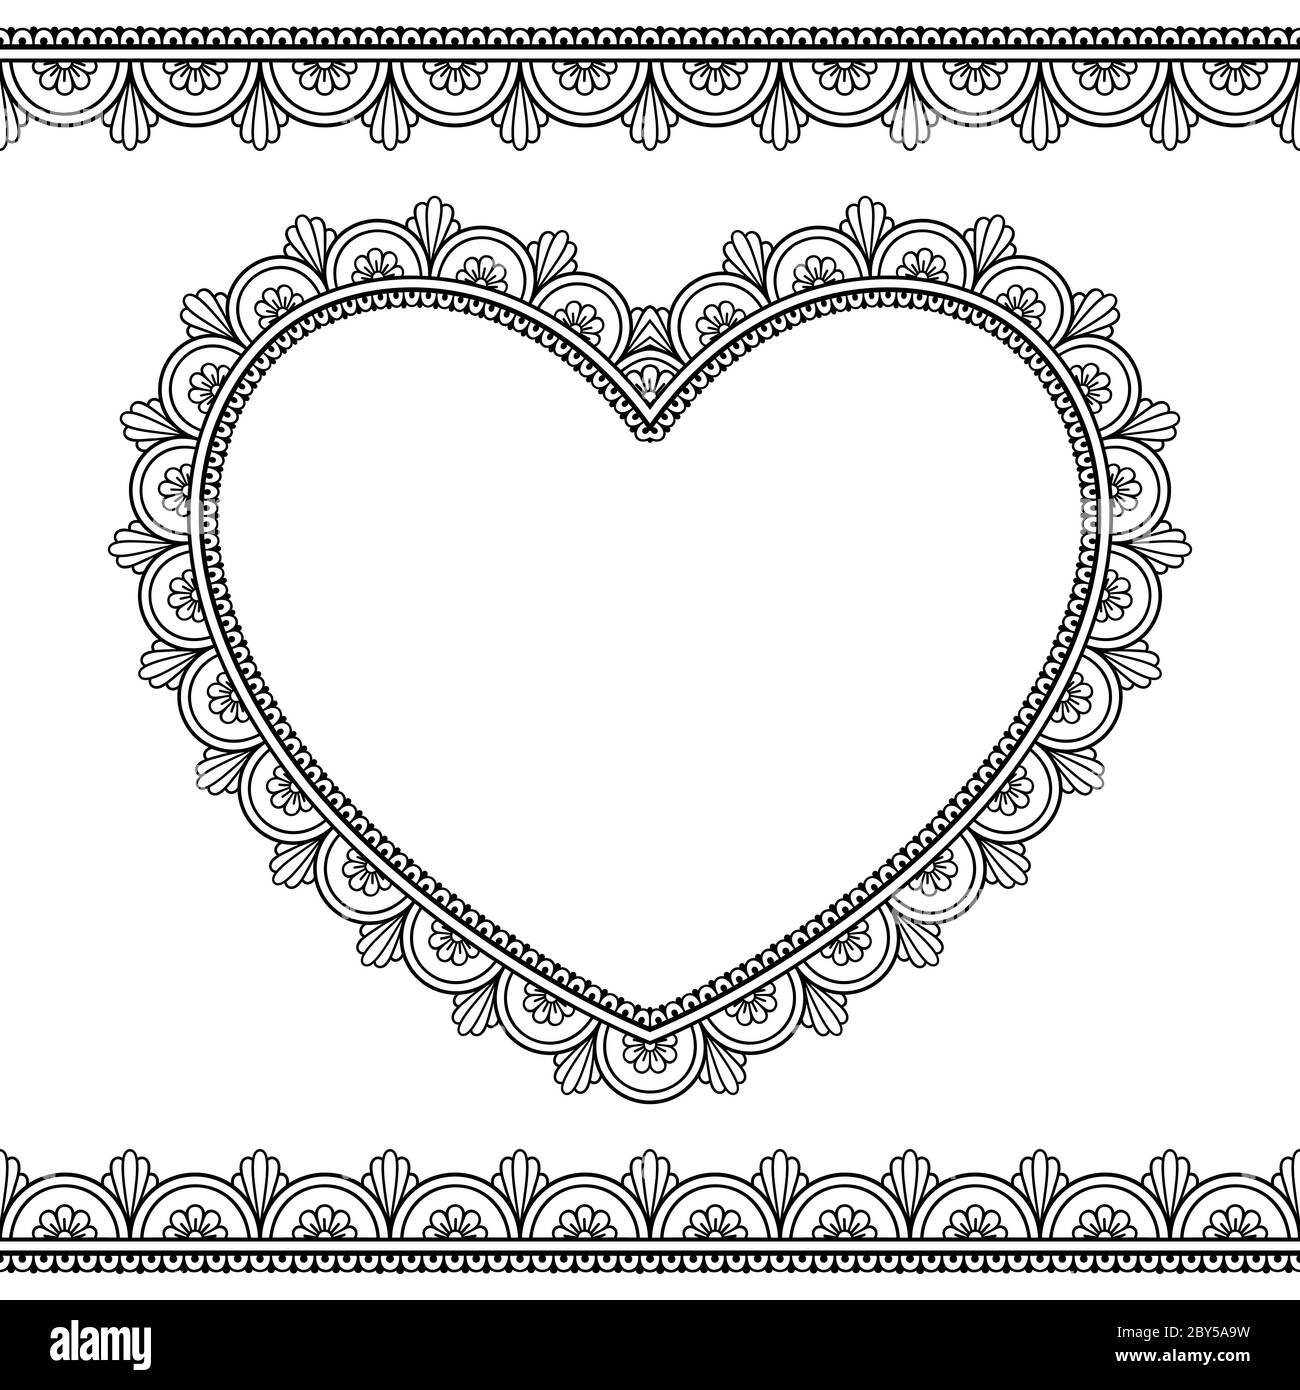 Set of seamless borders and heart for design, application of henna, Mehndi and tattoo. Decorative pattern in ethnic oriental style. Stock Vector